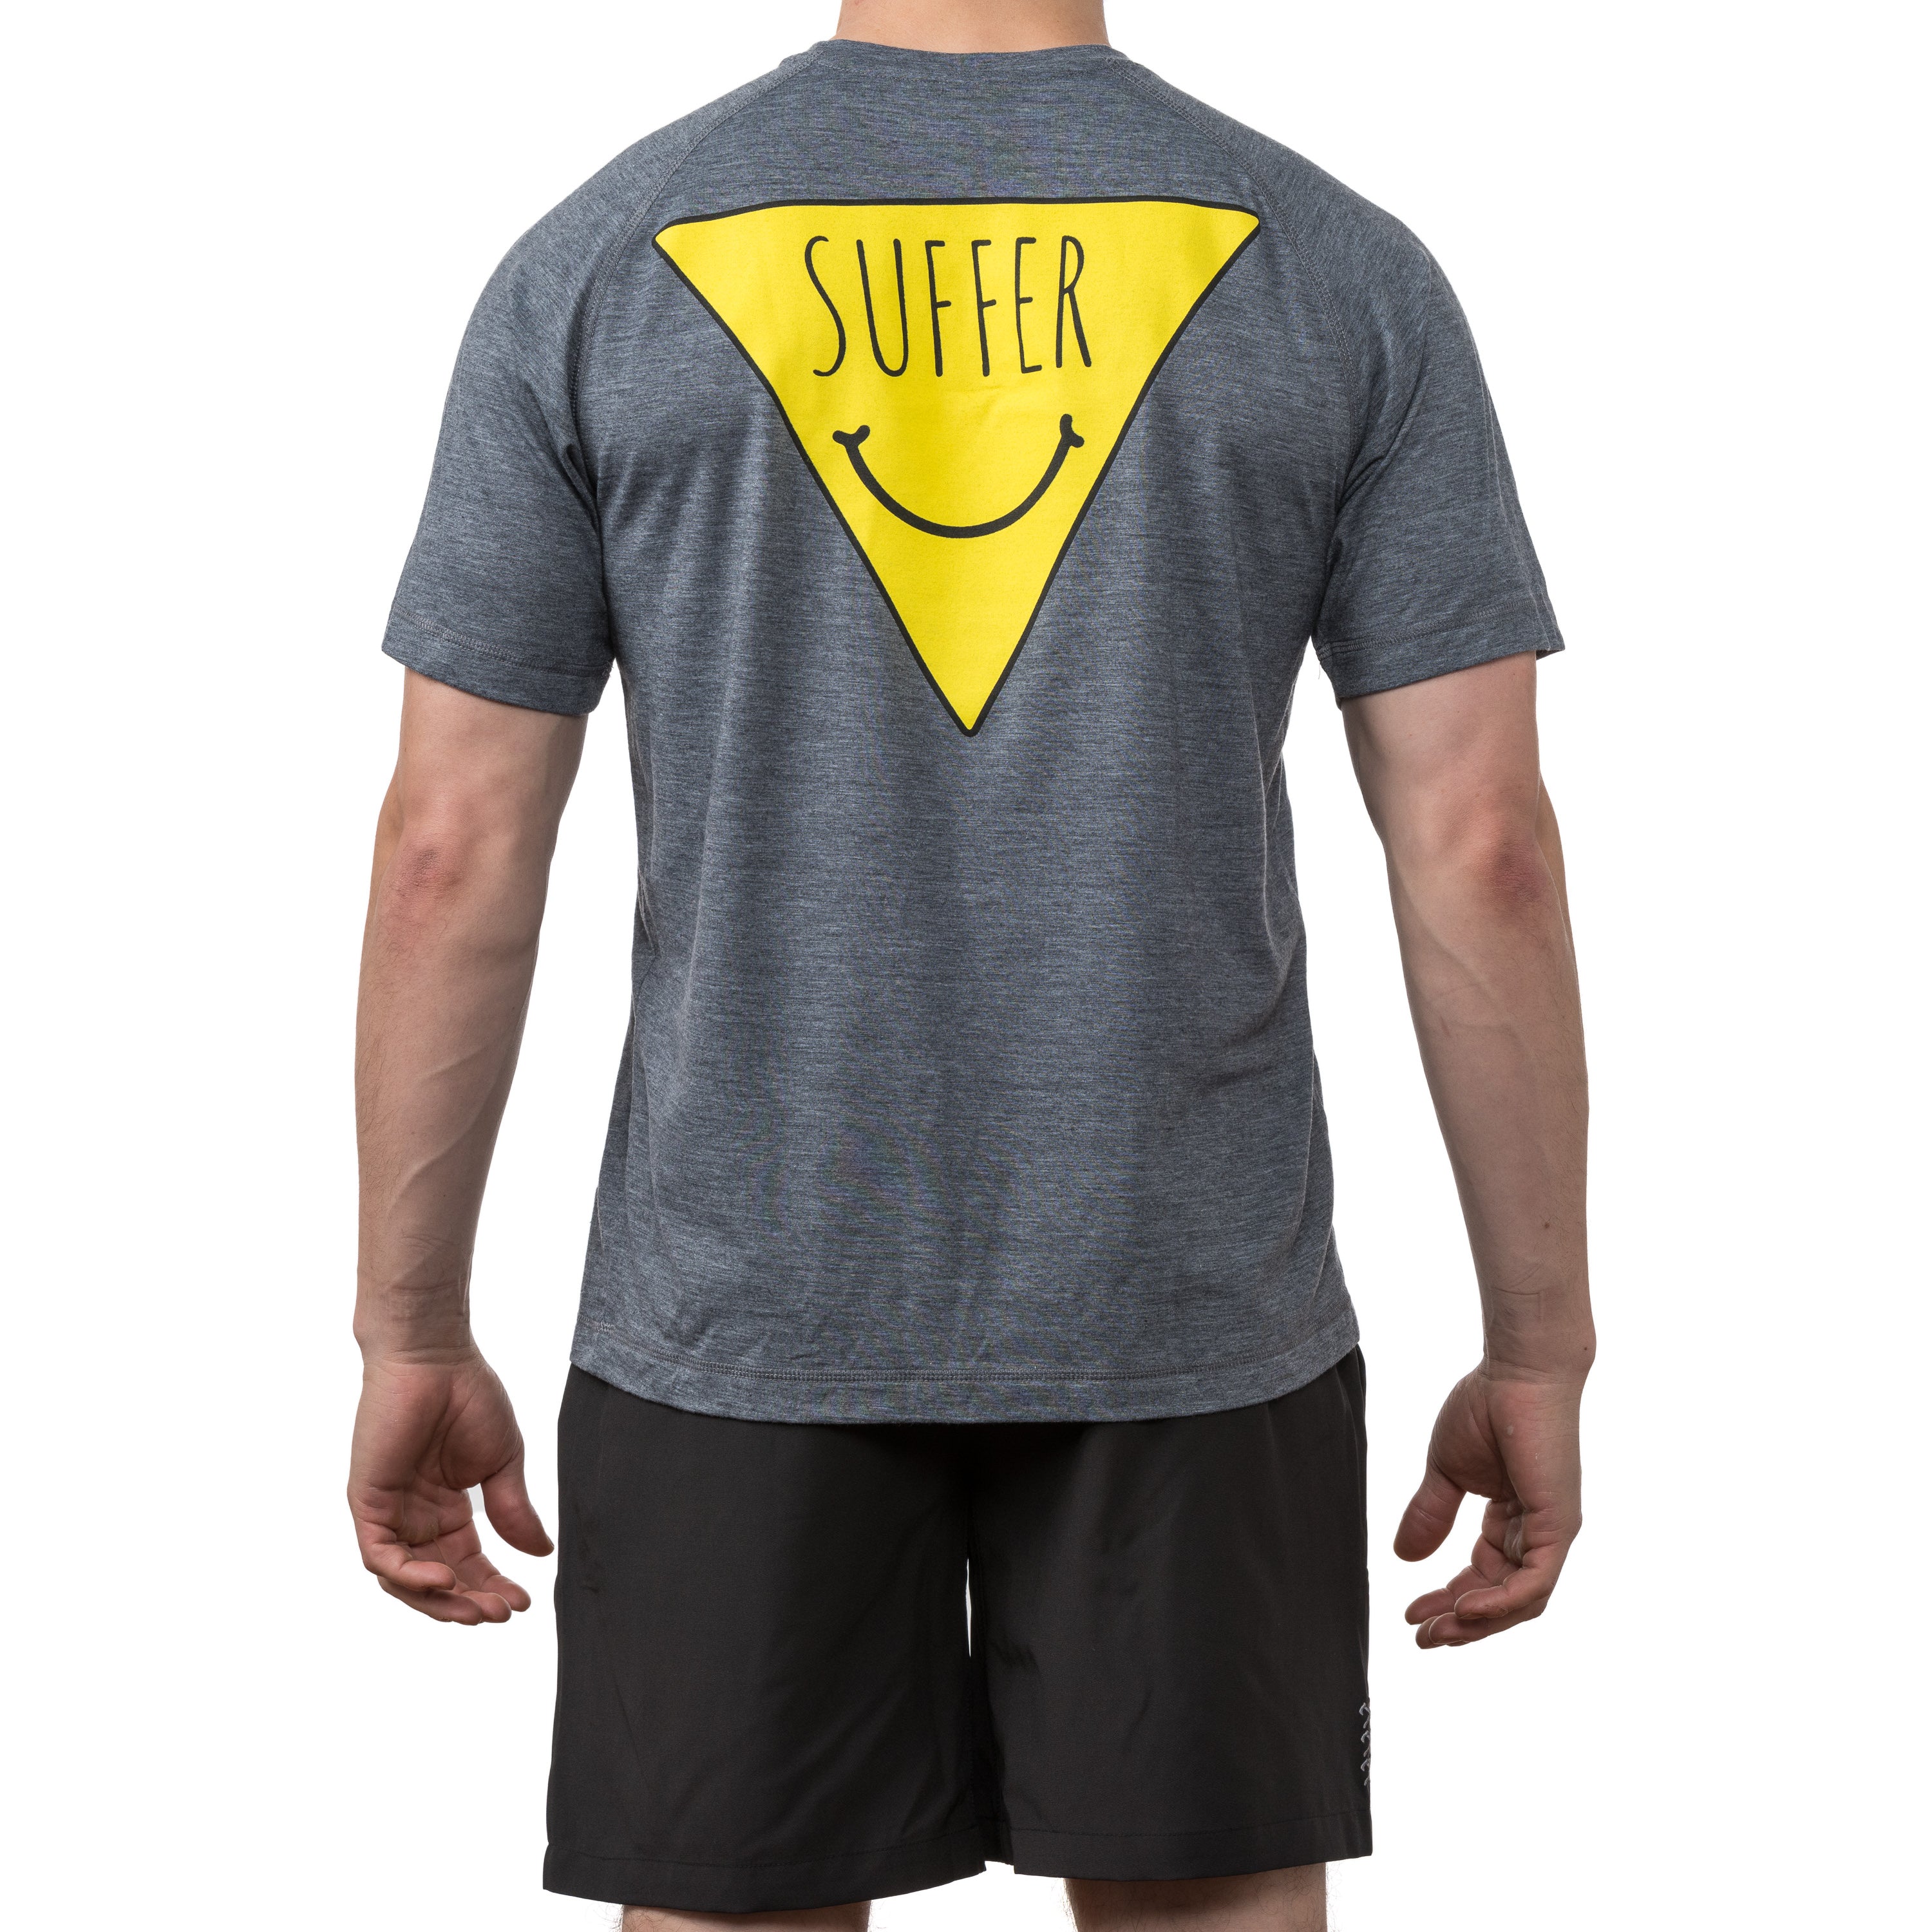 Suffer Hover Tee